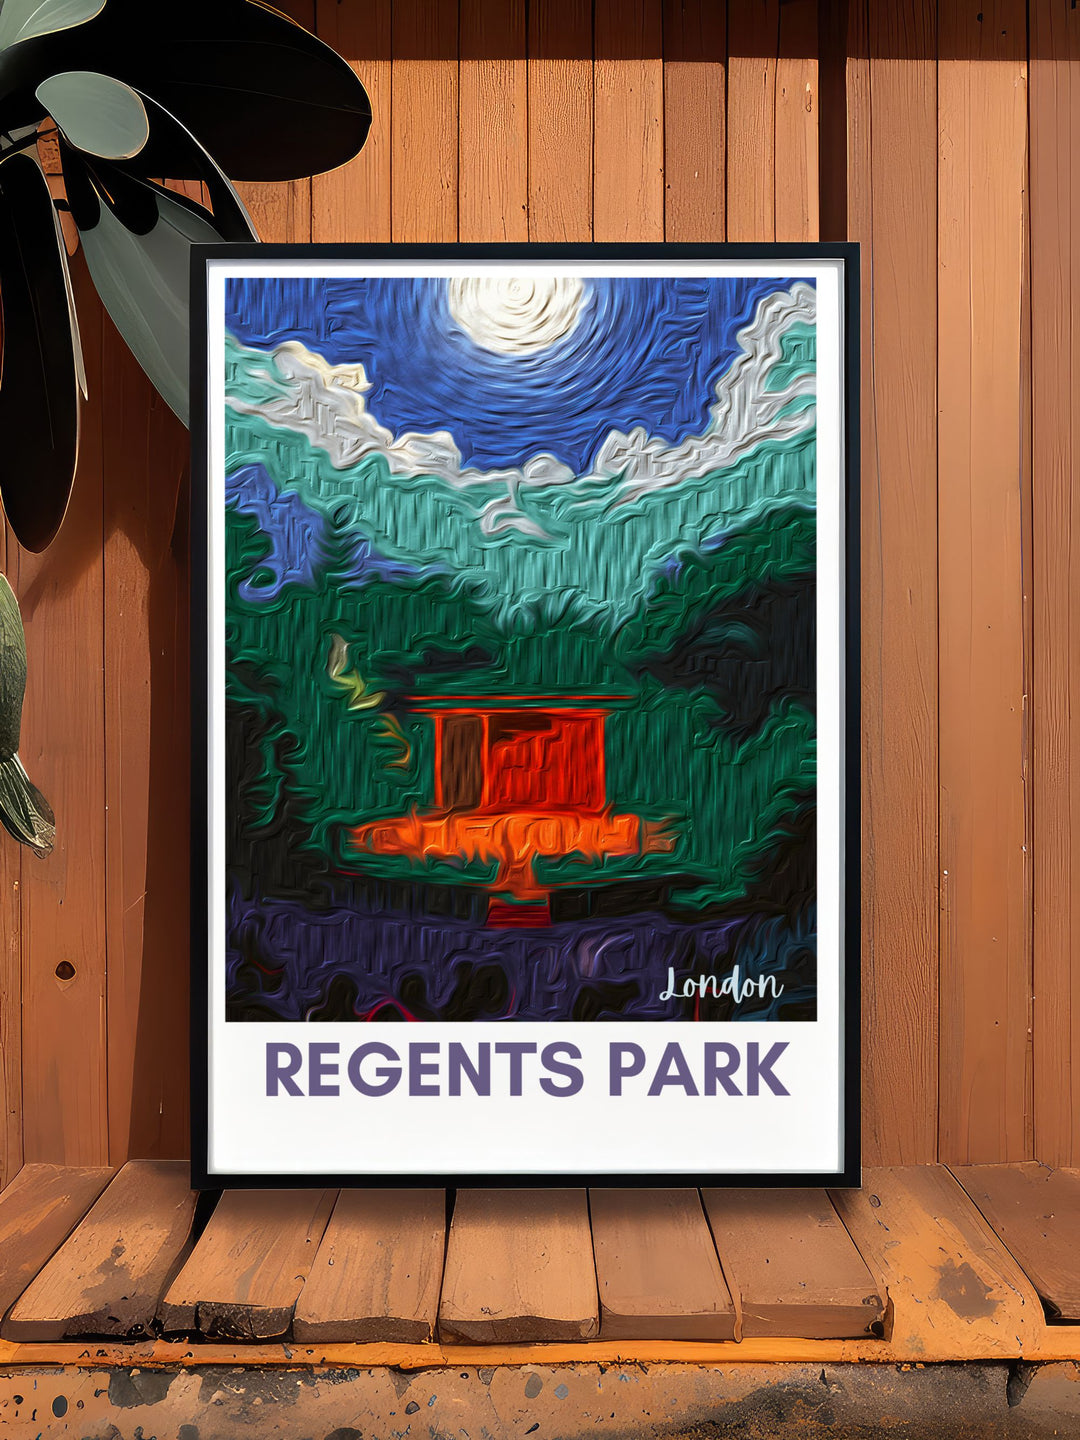 Framed Art of Regents Park highlighting the lush landscapes and historic landmarks, bringing a piece of Londons beauty into your home.